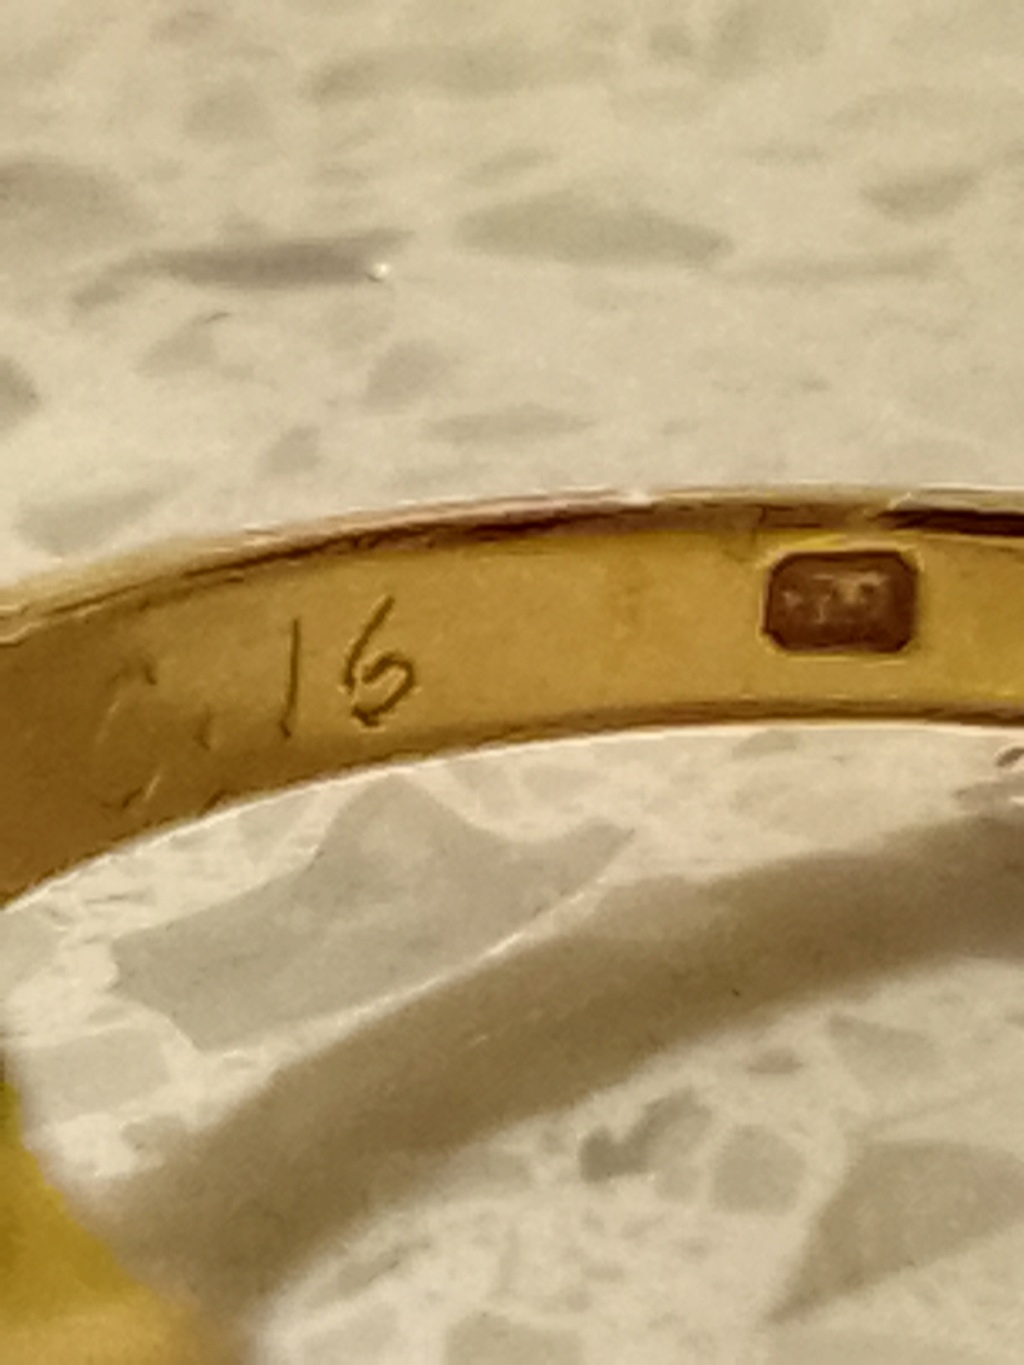 Identify ring markings... particularly C16 meaning Img_2065